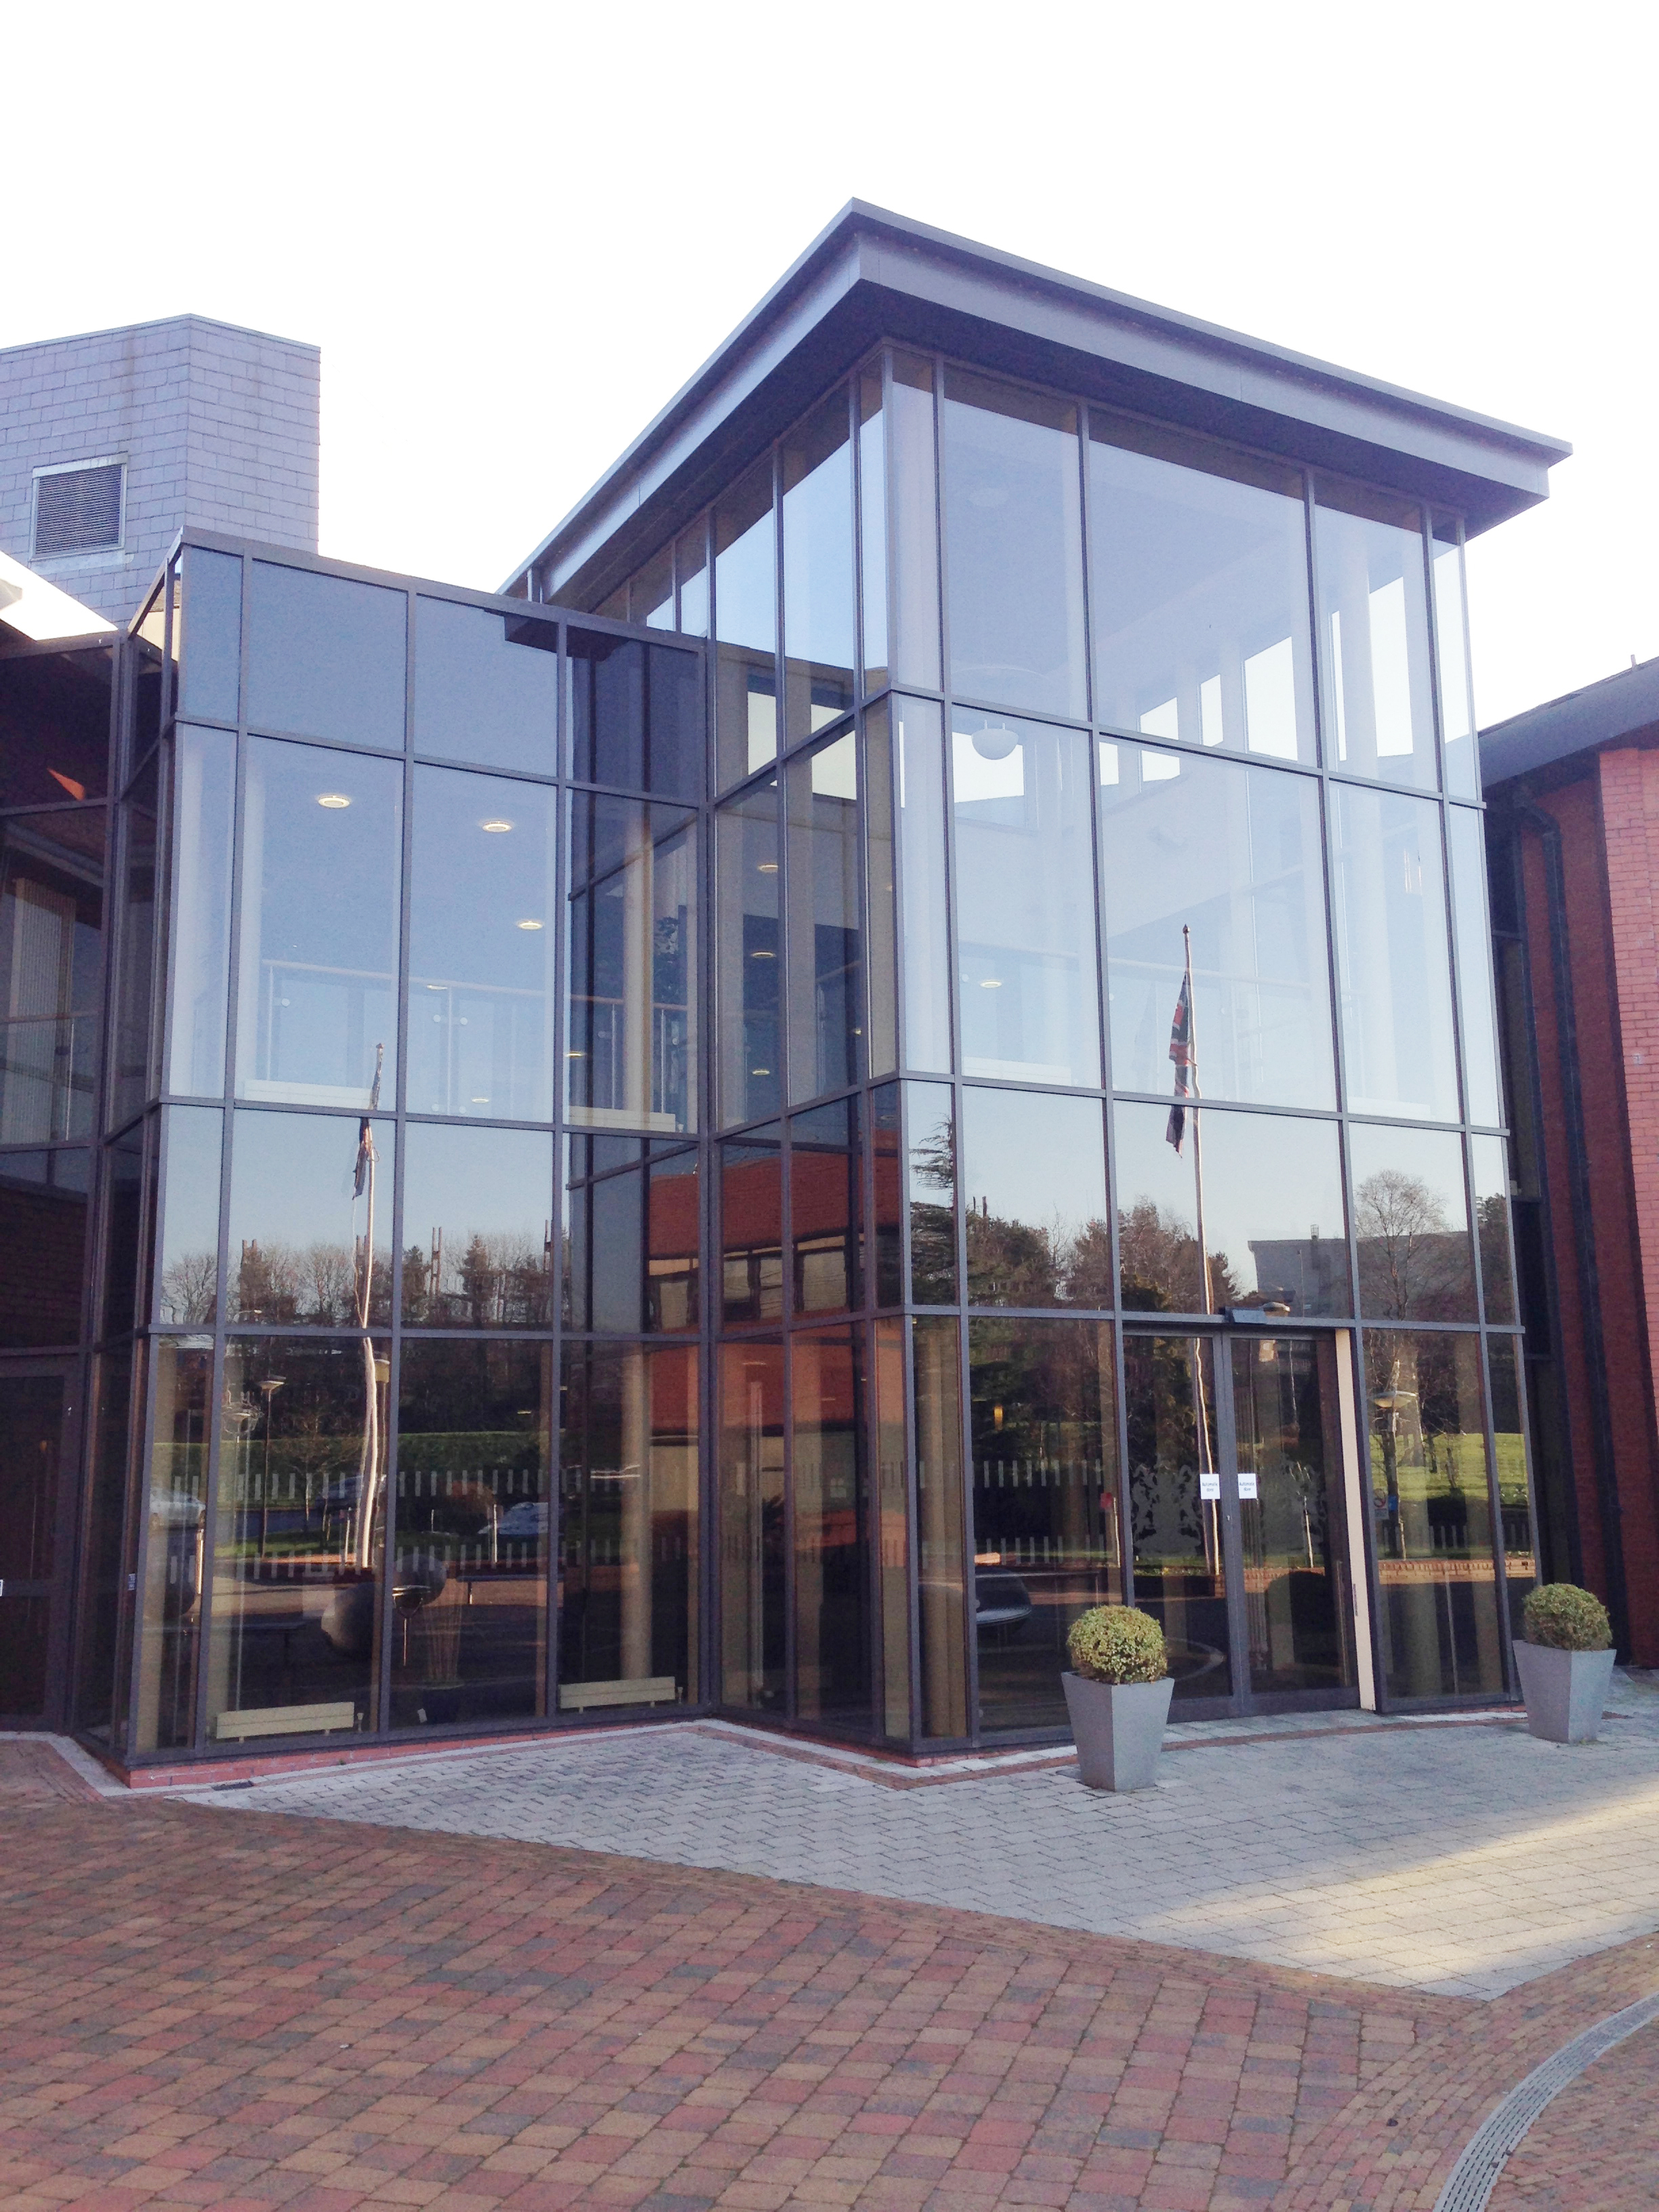  The modern façade of Craigavon Conference and Civic Centre reflects the ubiquitous union flag